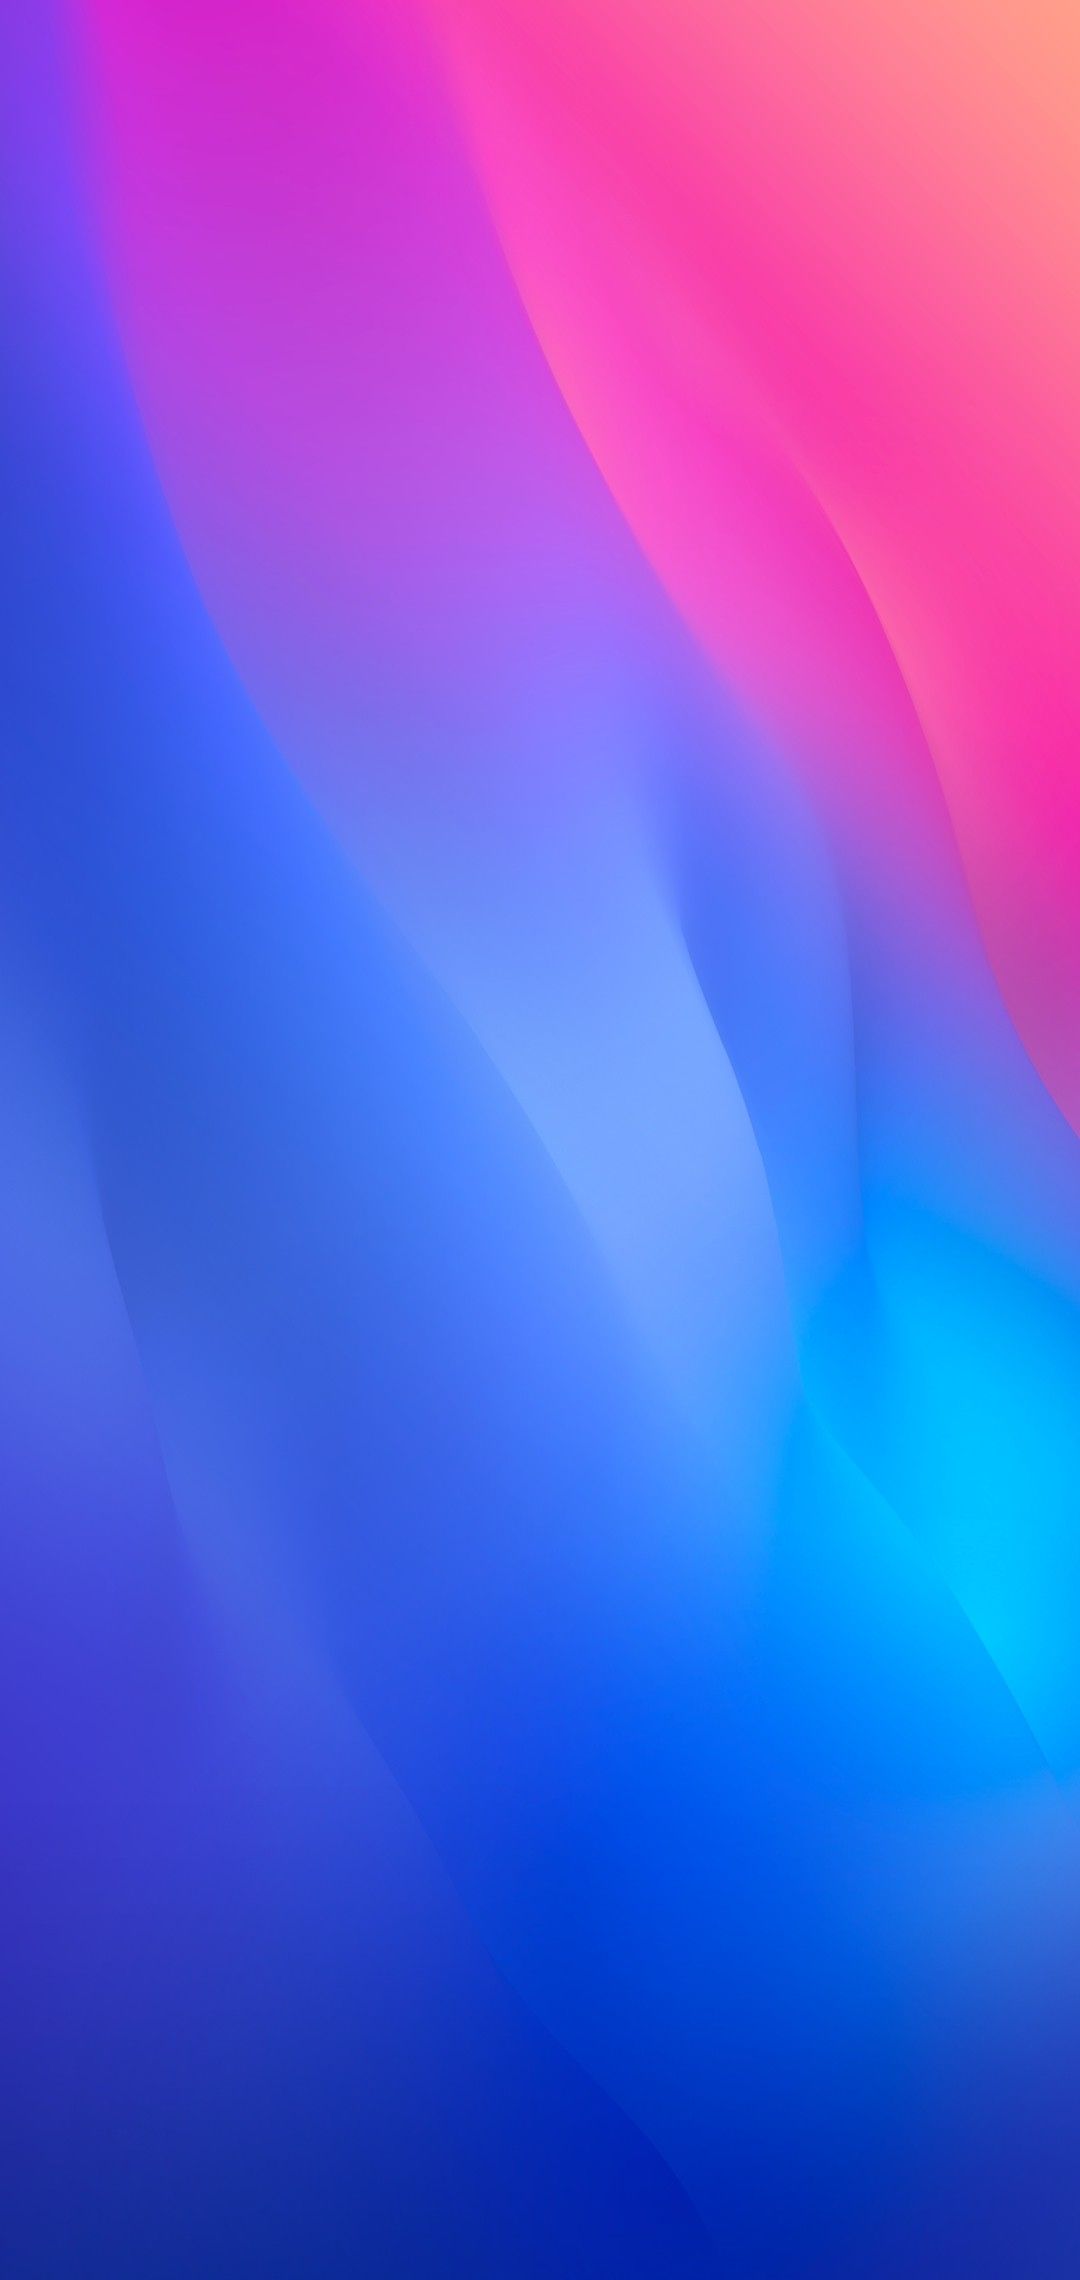 Pink And Blue Iphone Wallpapers